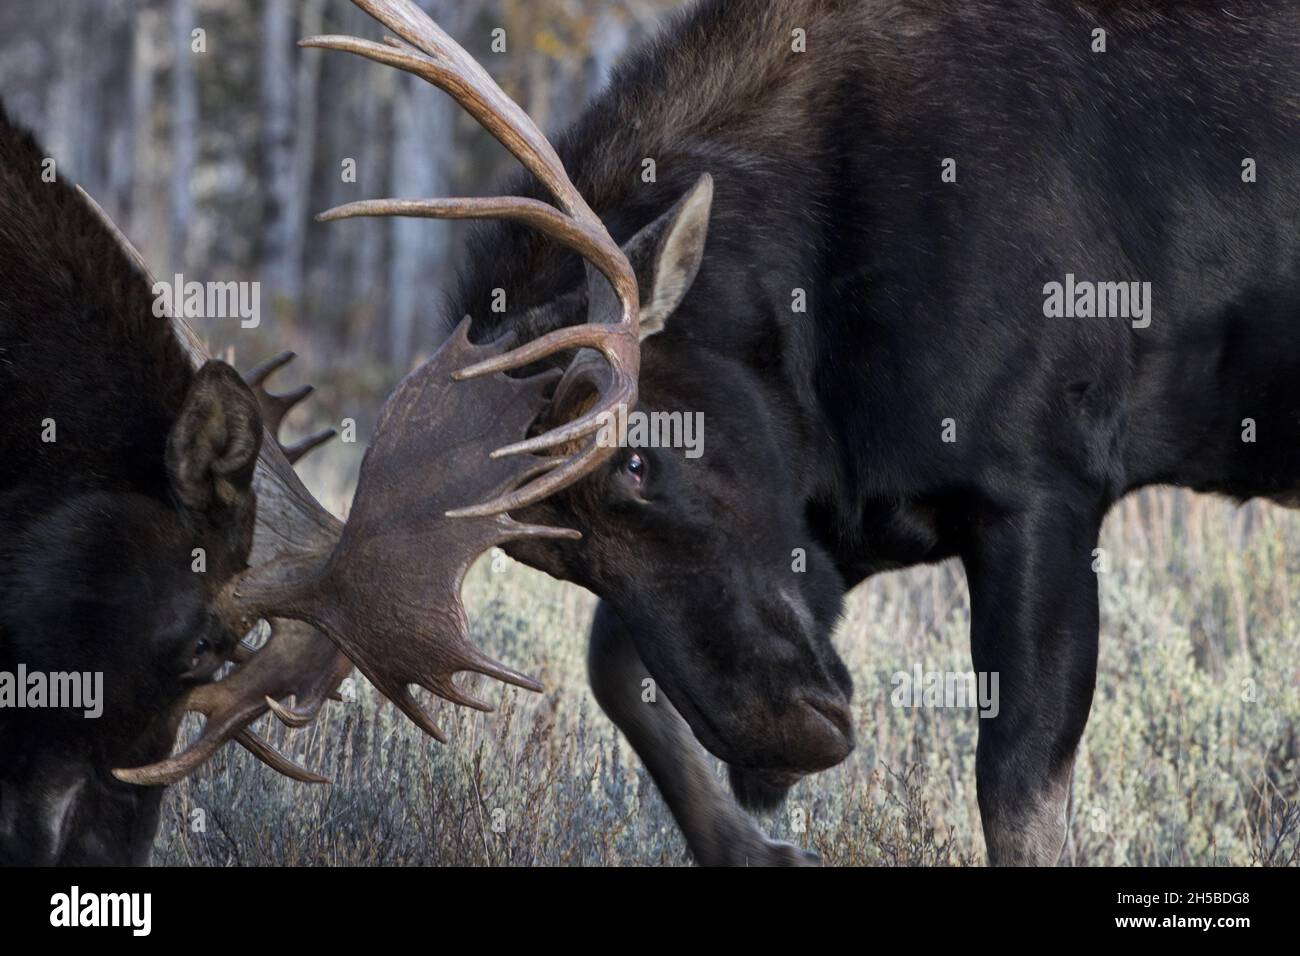 Bull moose battle fiercely with locked antlers during autumn rut in Jackson, Wyoming, along Moose Wilson Road in horizontal close up Stock Photo